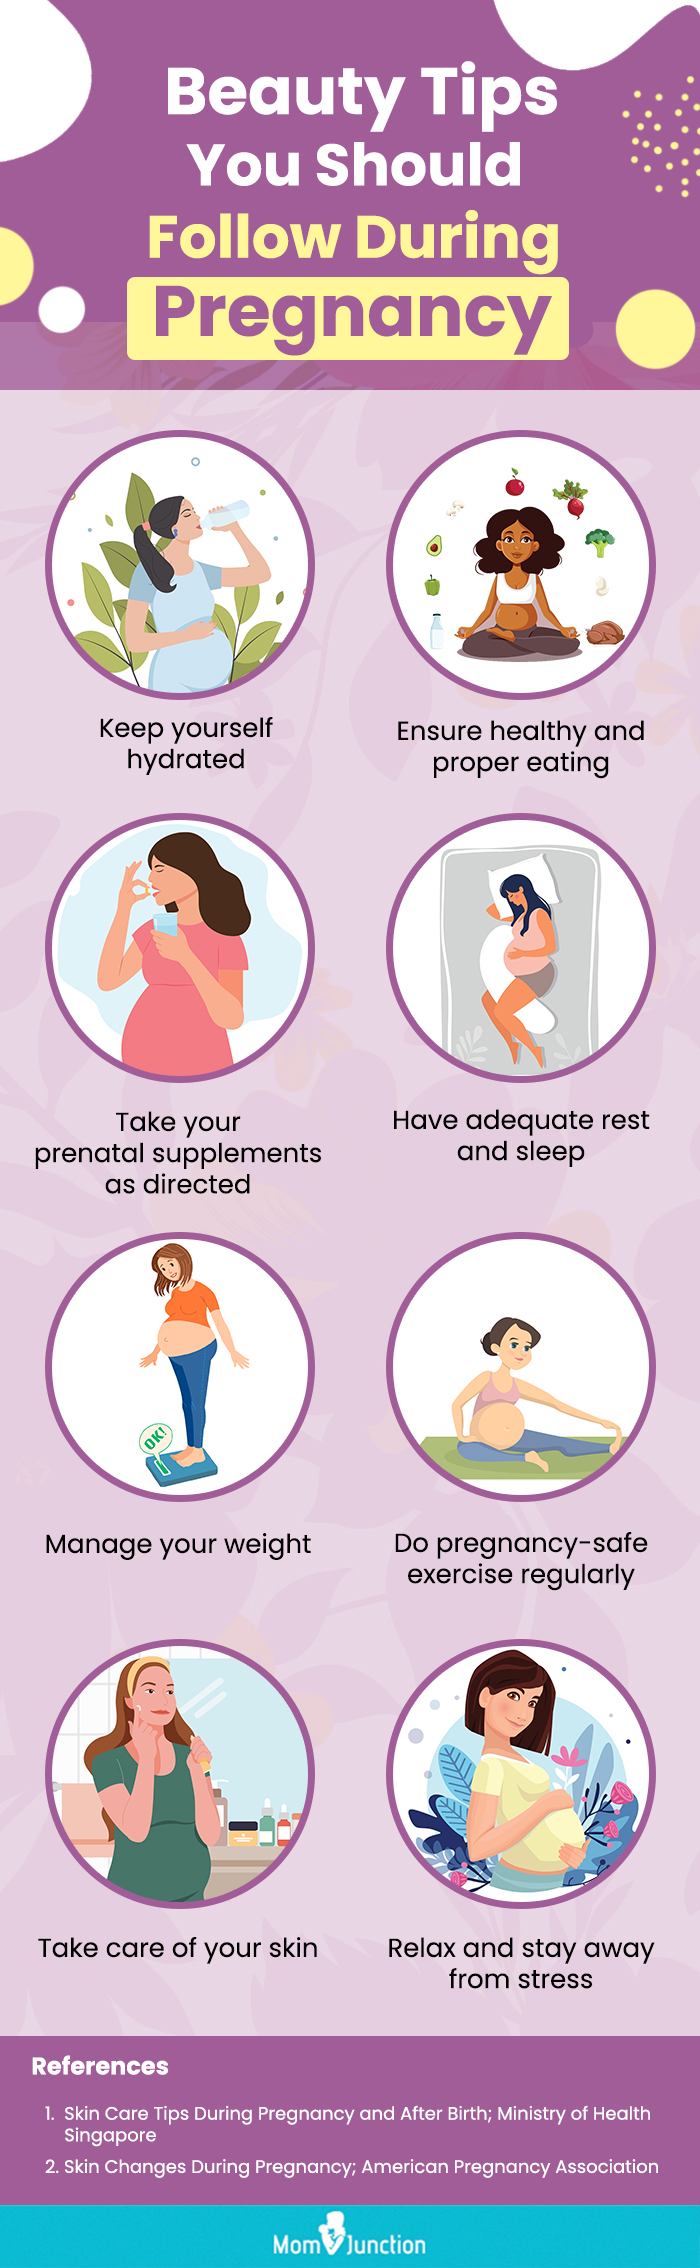 beauty tips you should follow during pregnancy (infographic) 